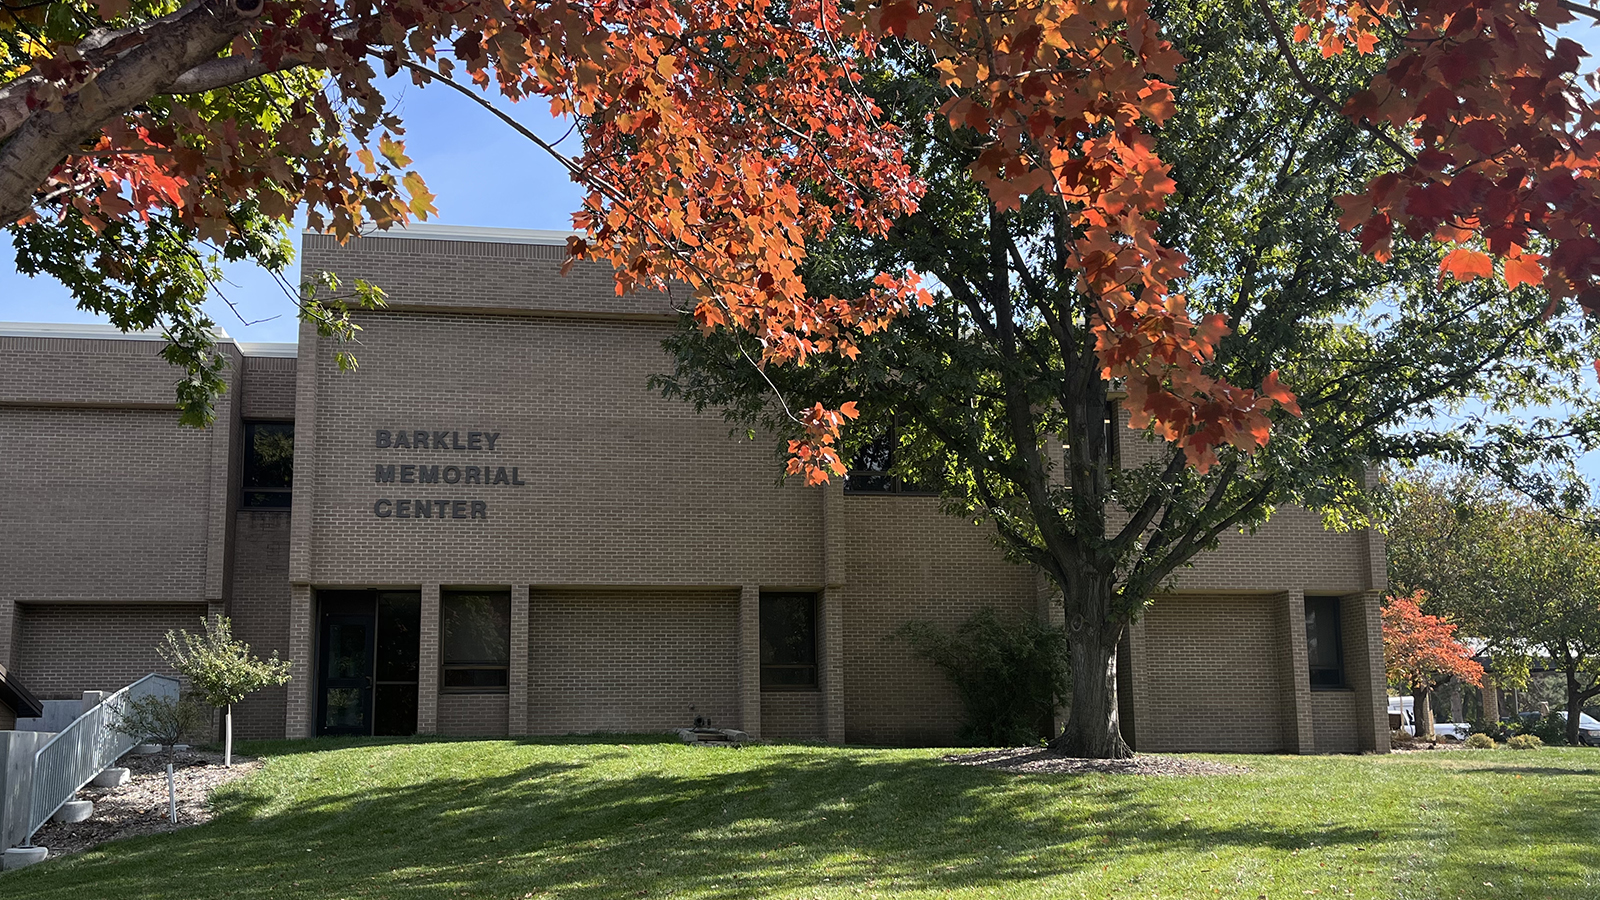 the Barkley Memorial Center with tree leaves in fall colors